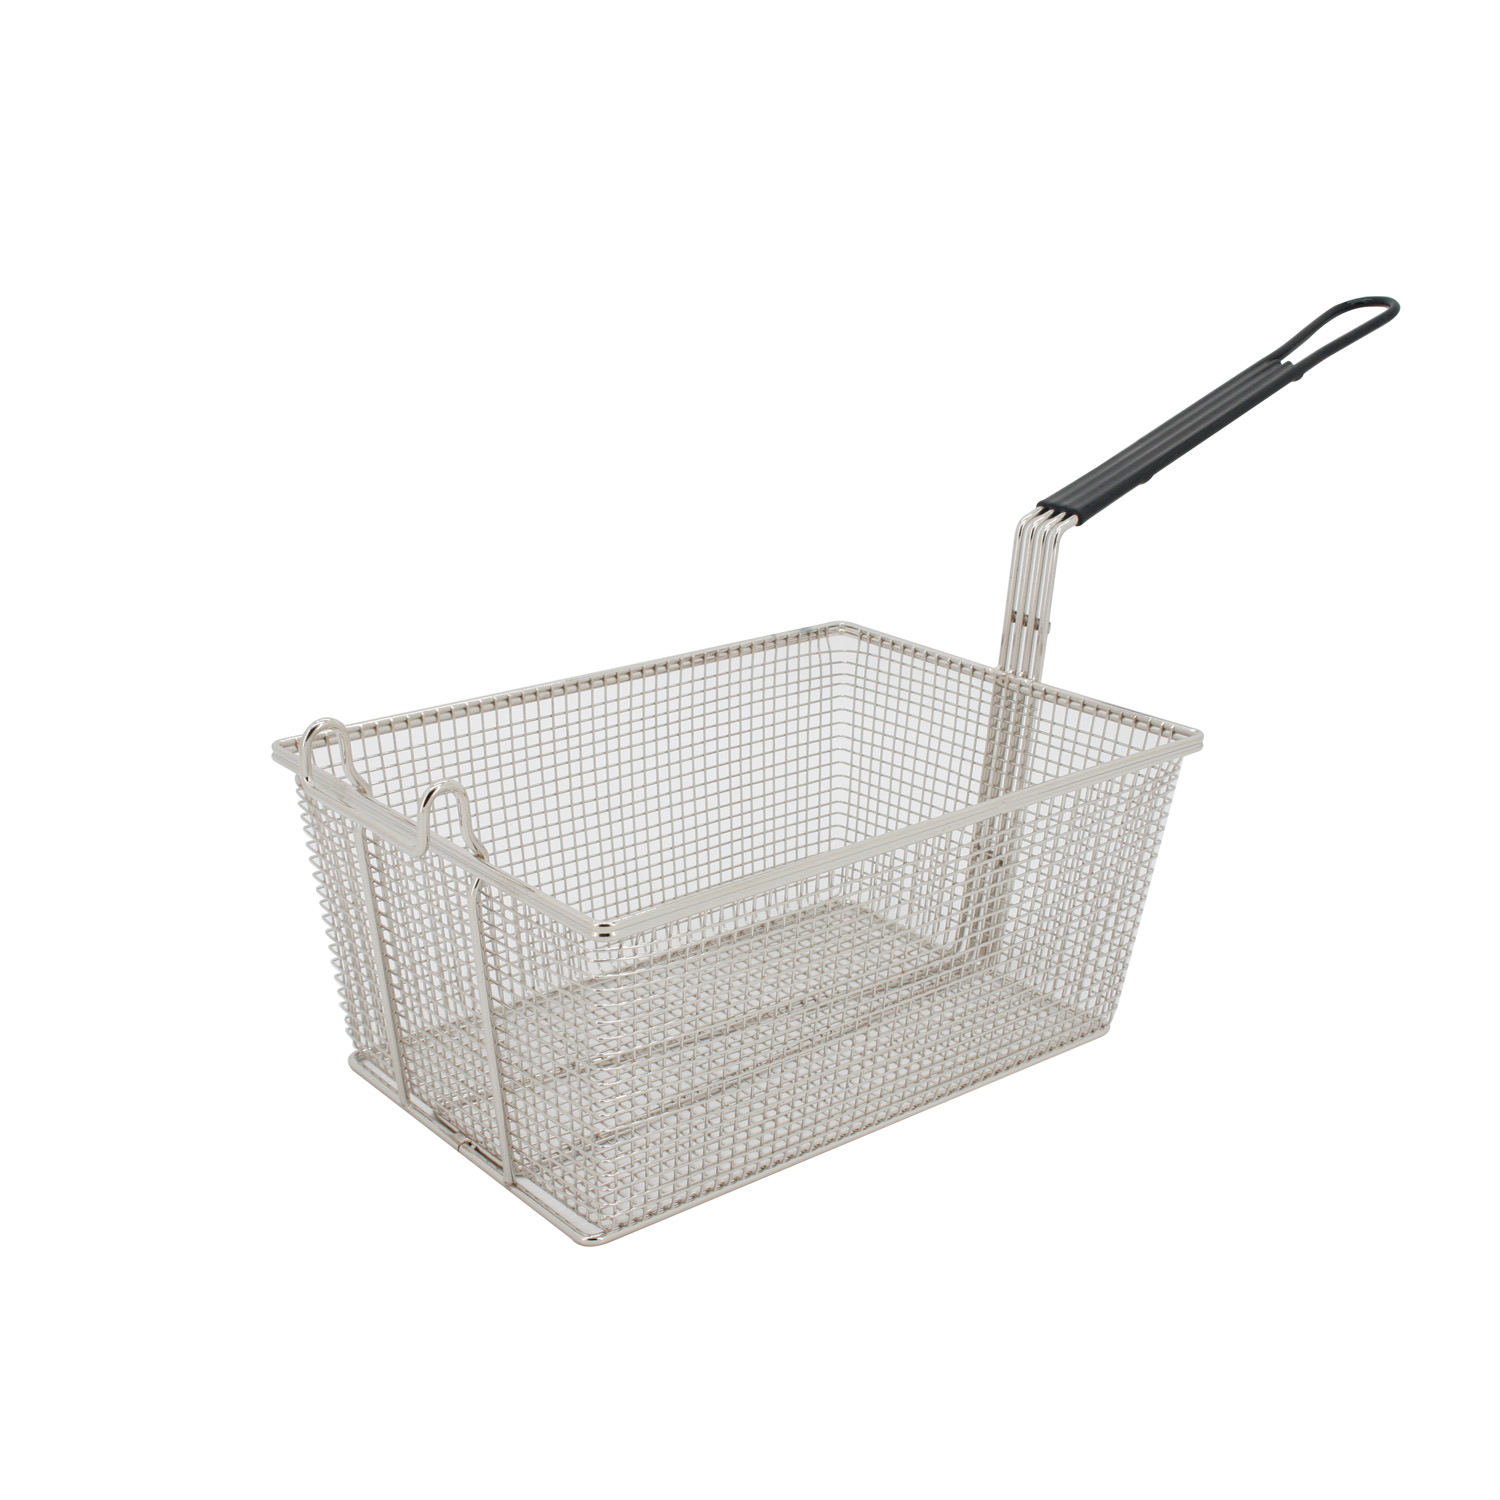 CAC China SPFB-6 Nickel-Plated Fry Basket with Black Handle 13-3/8" x 9-1/2" x 6-1/4"